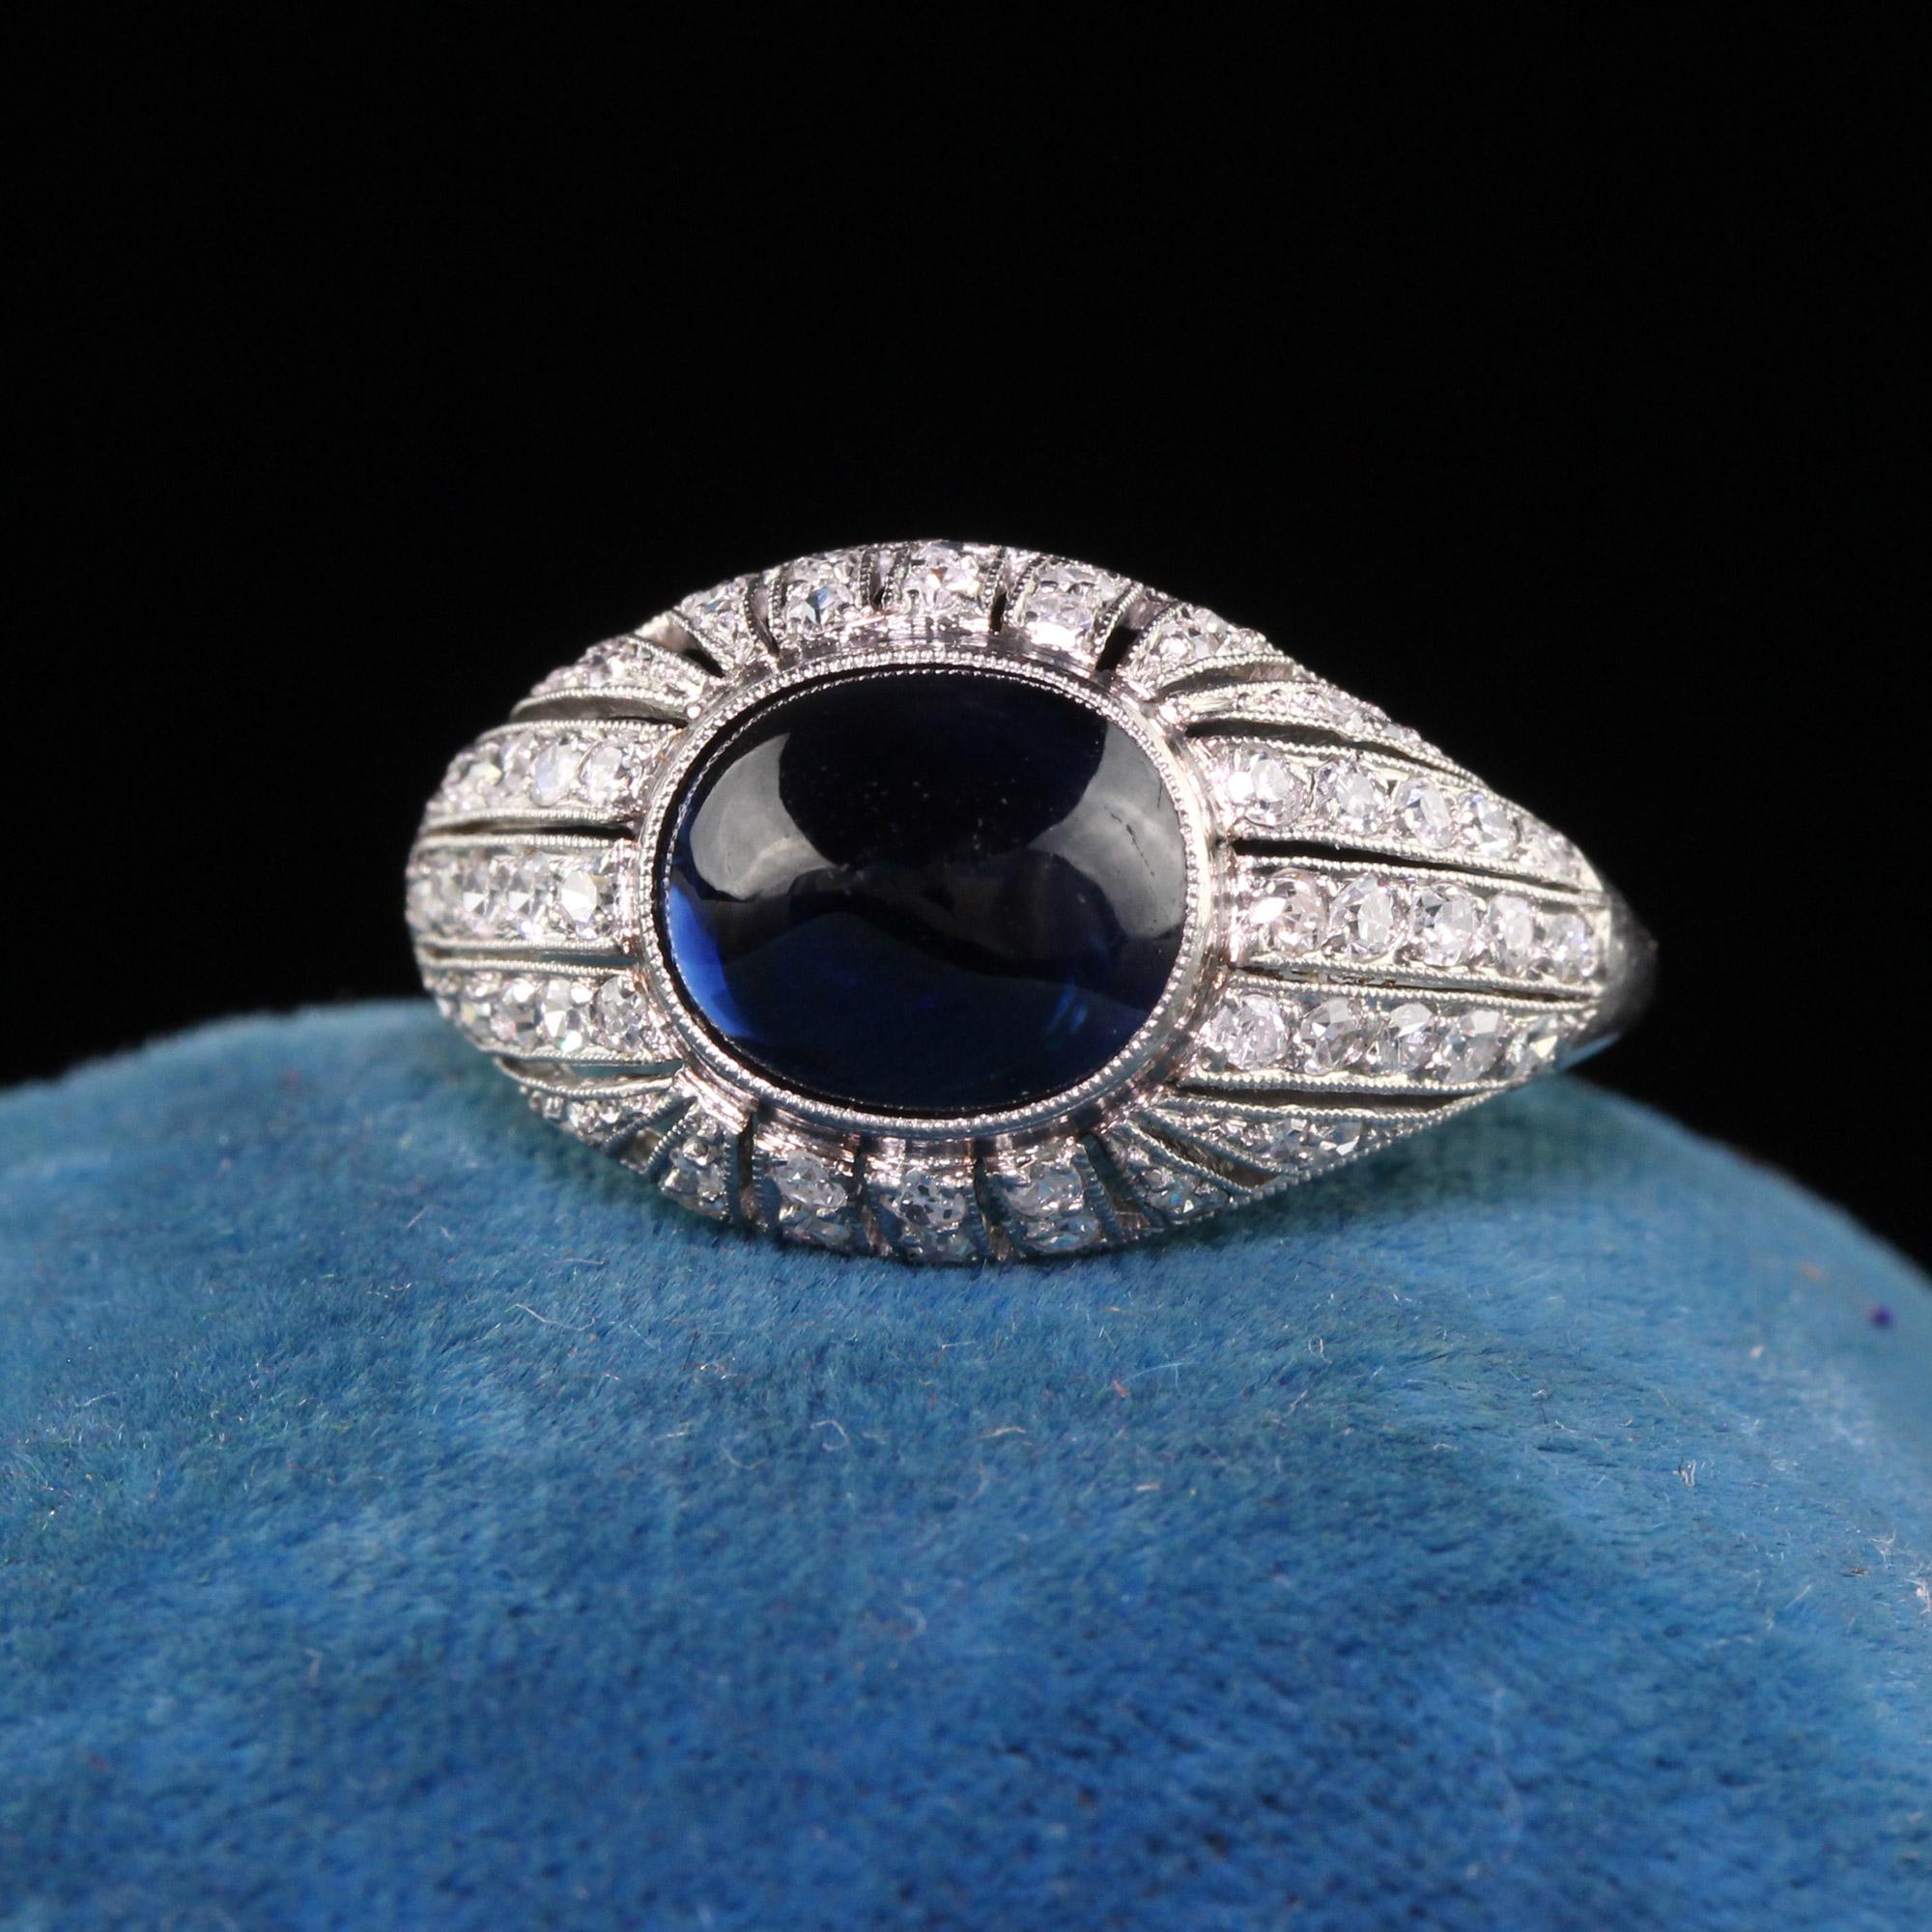 Beautiful Antique Art Deco Platinum French Sugarloaf Sapphire Diamond Engagement Ring. This incredible engagement ring is crafted in platinum. The center holds a natural sugarloaf sapphire in a French mounting. There are chunky single cut diamonds